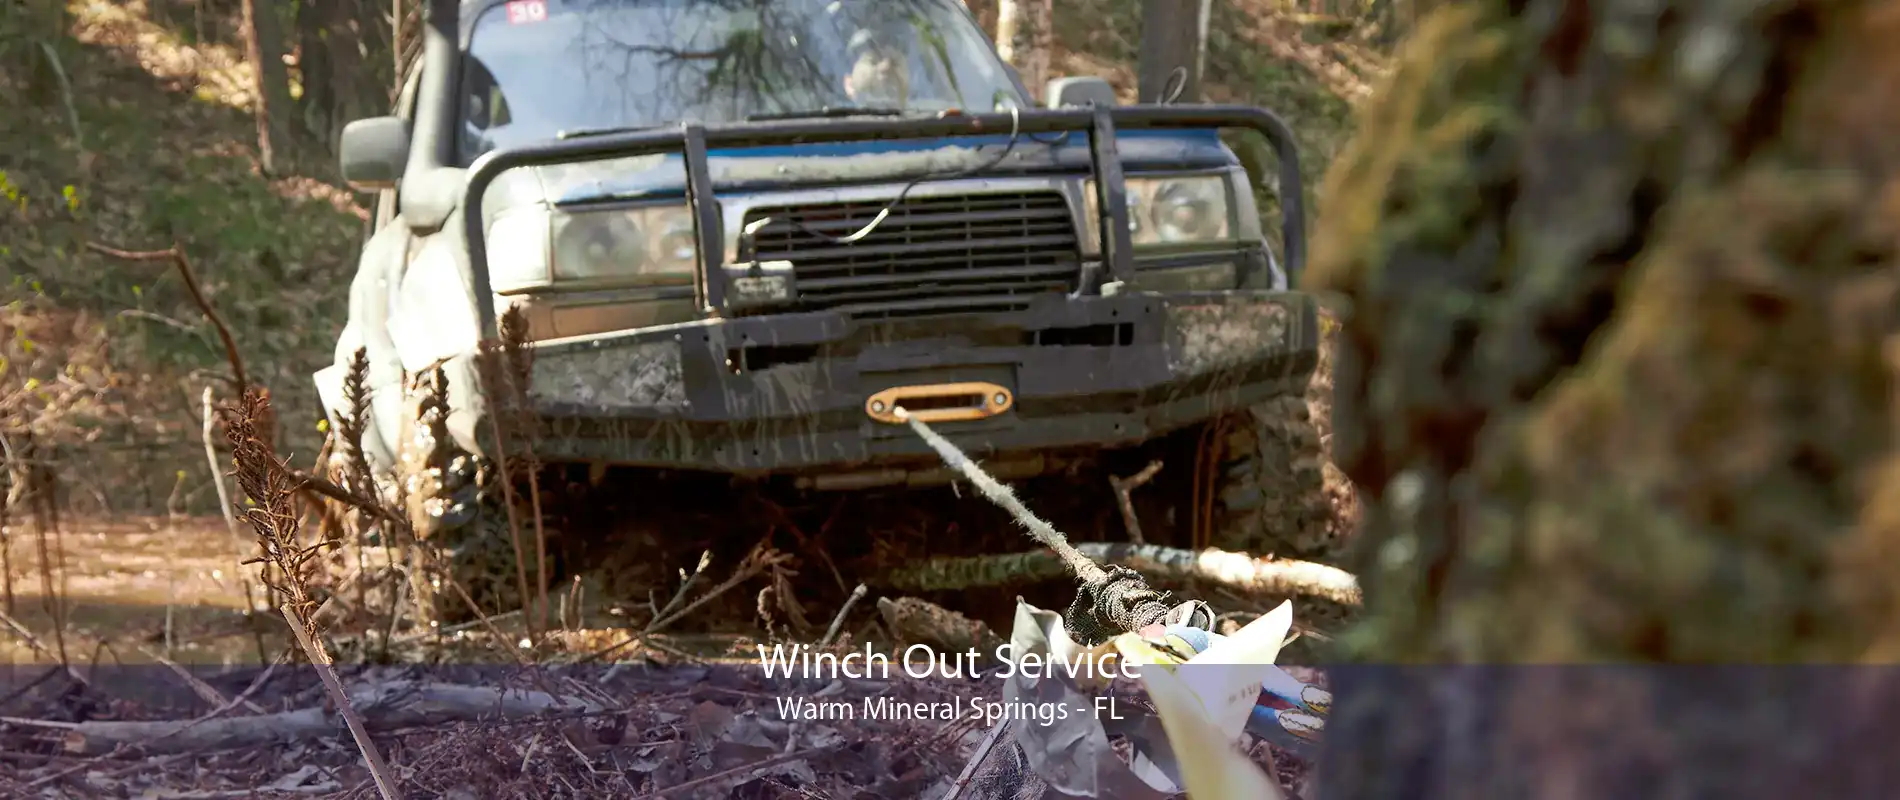 Winch Out Service Warm Mineral Springs - FL